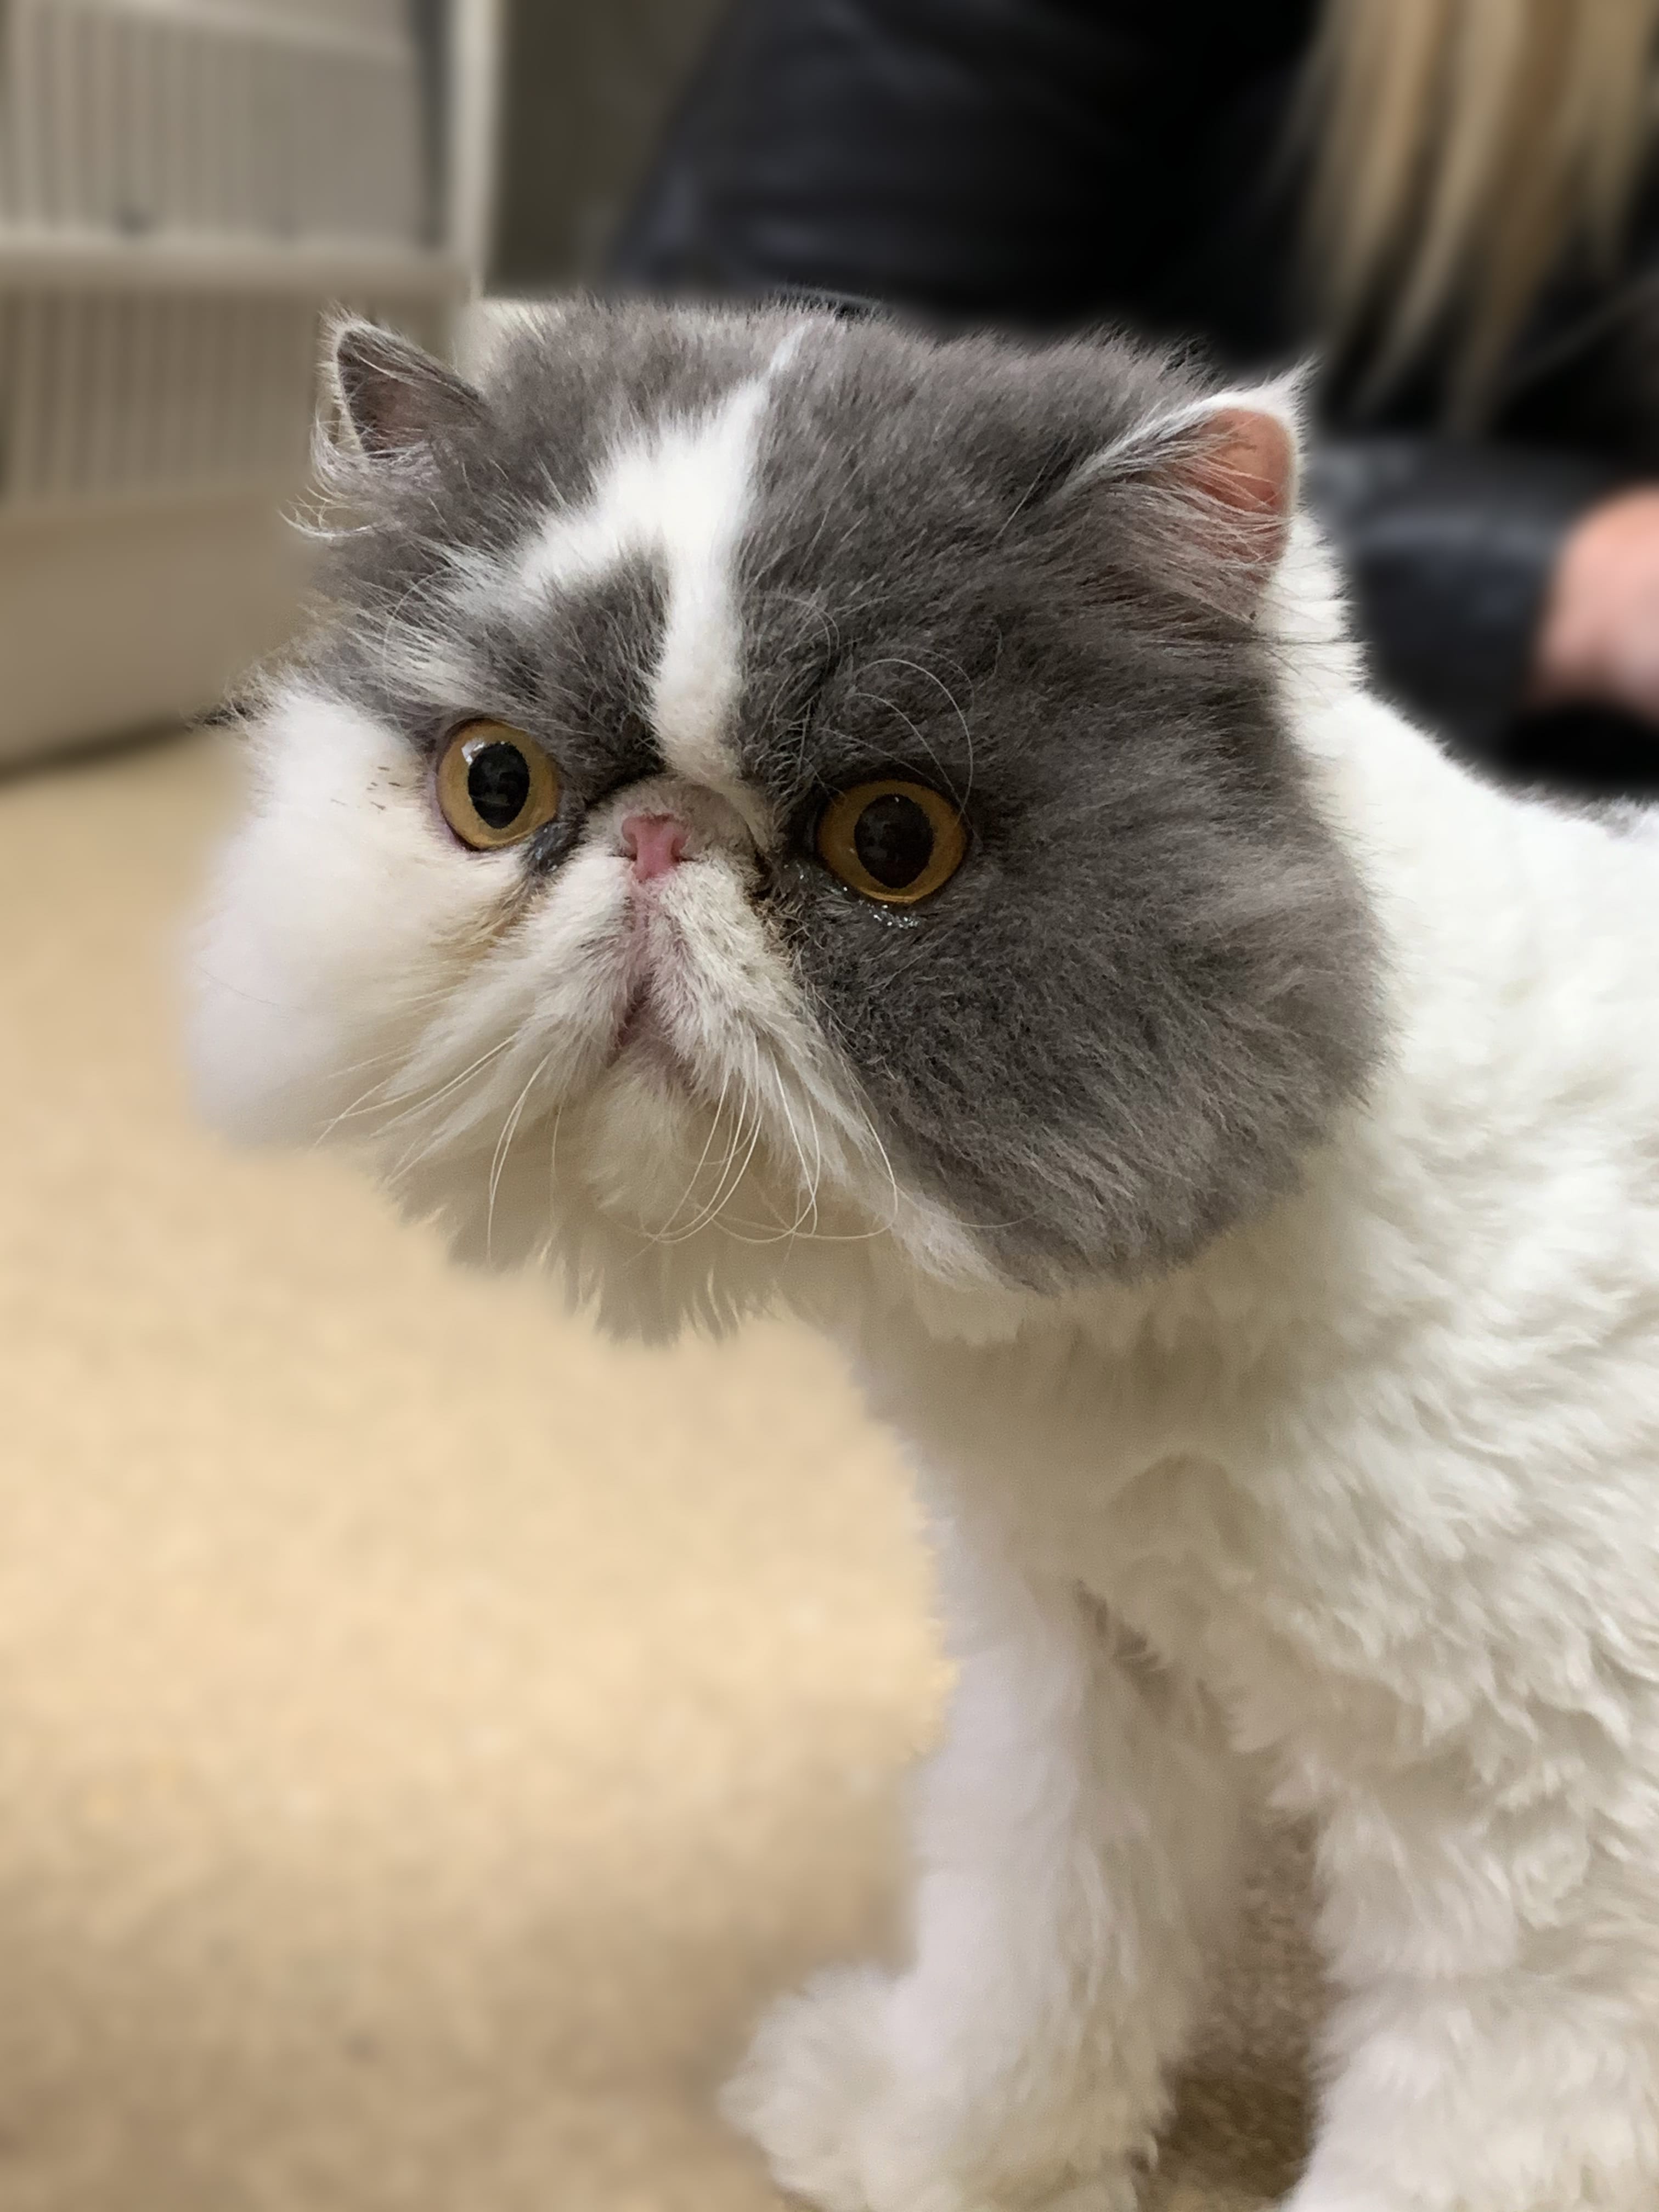 This Persian is Ivy! She’s pleasant and peaceful. She’s looking for an experienced adopter who will keep her groomed. These pets are among those available for adoption from 11 a.m. to 2 p.m. Monday through Saturday at West Columbia Gorge Humane Society, 2675 S. Index St., Washougal. Fees include spay/neuter, microchip, vaccinations and flea treatment.